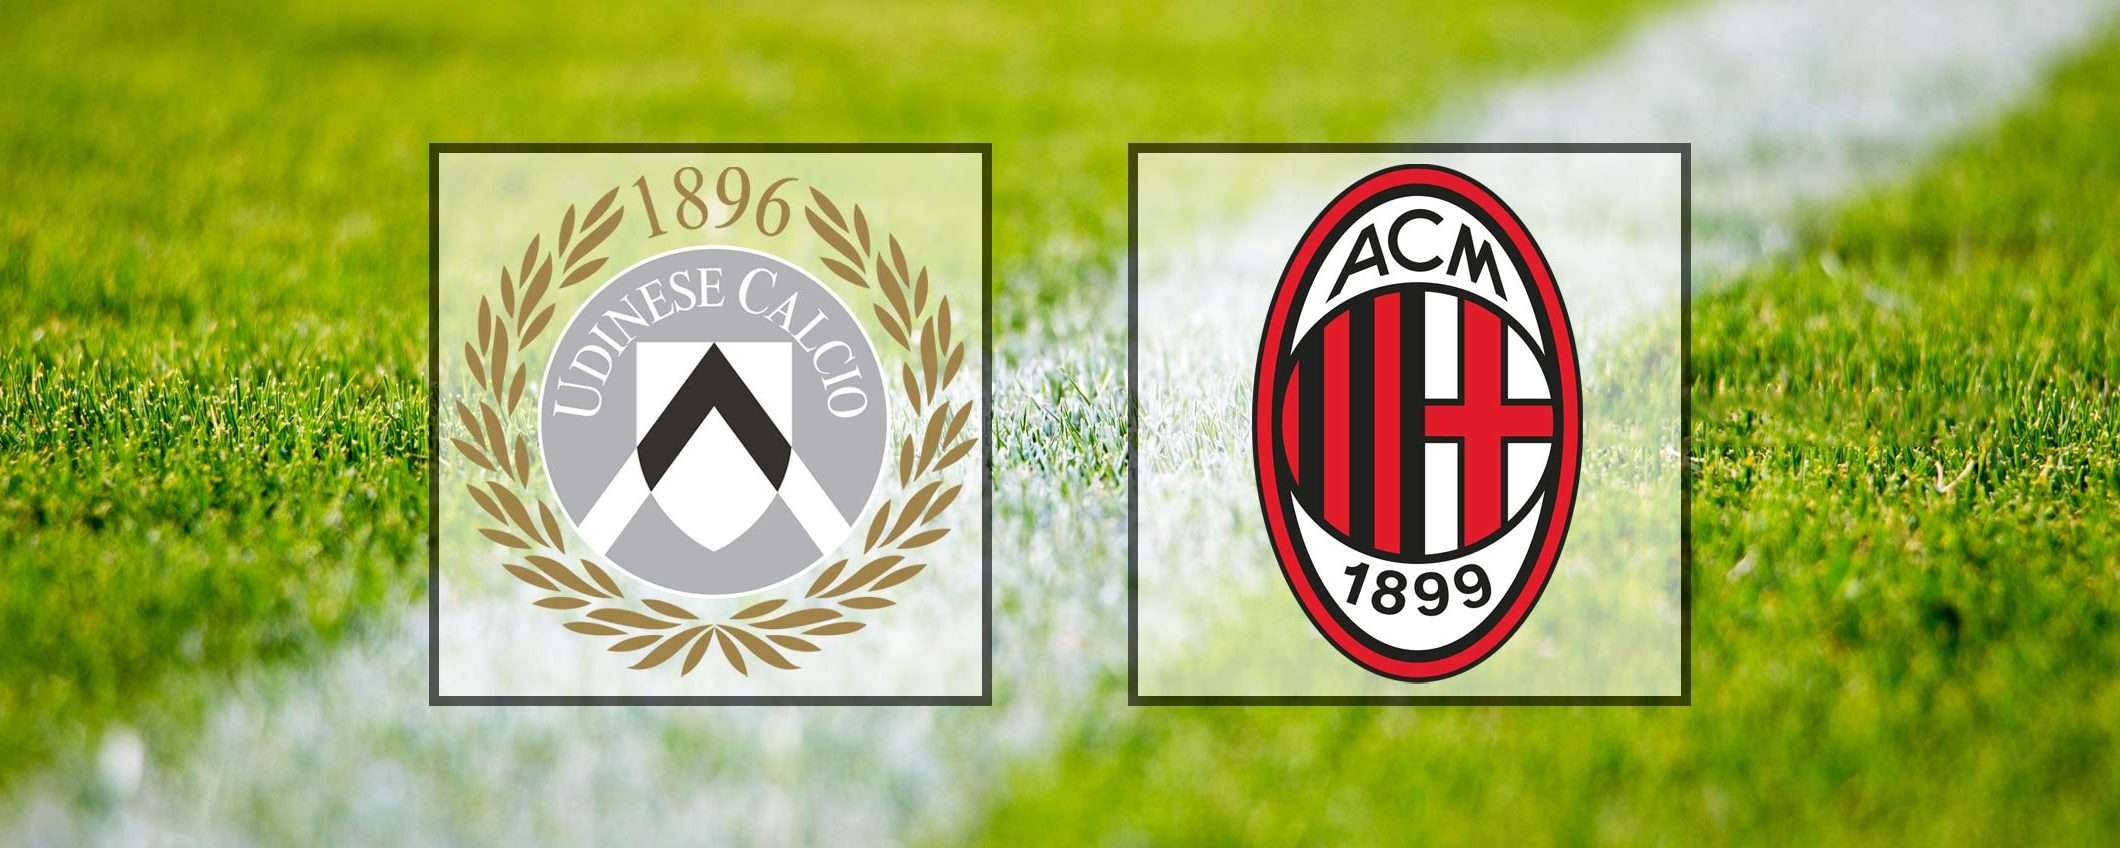 Come vedere Udinese-Milan in streaming (Serie A)